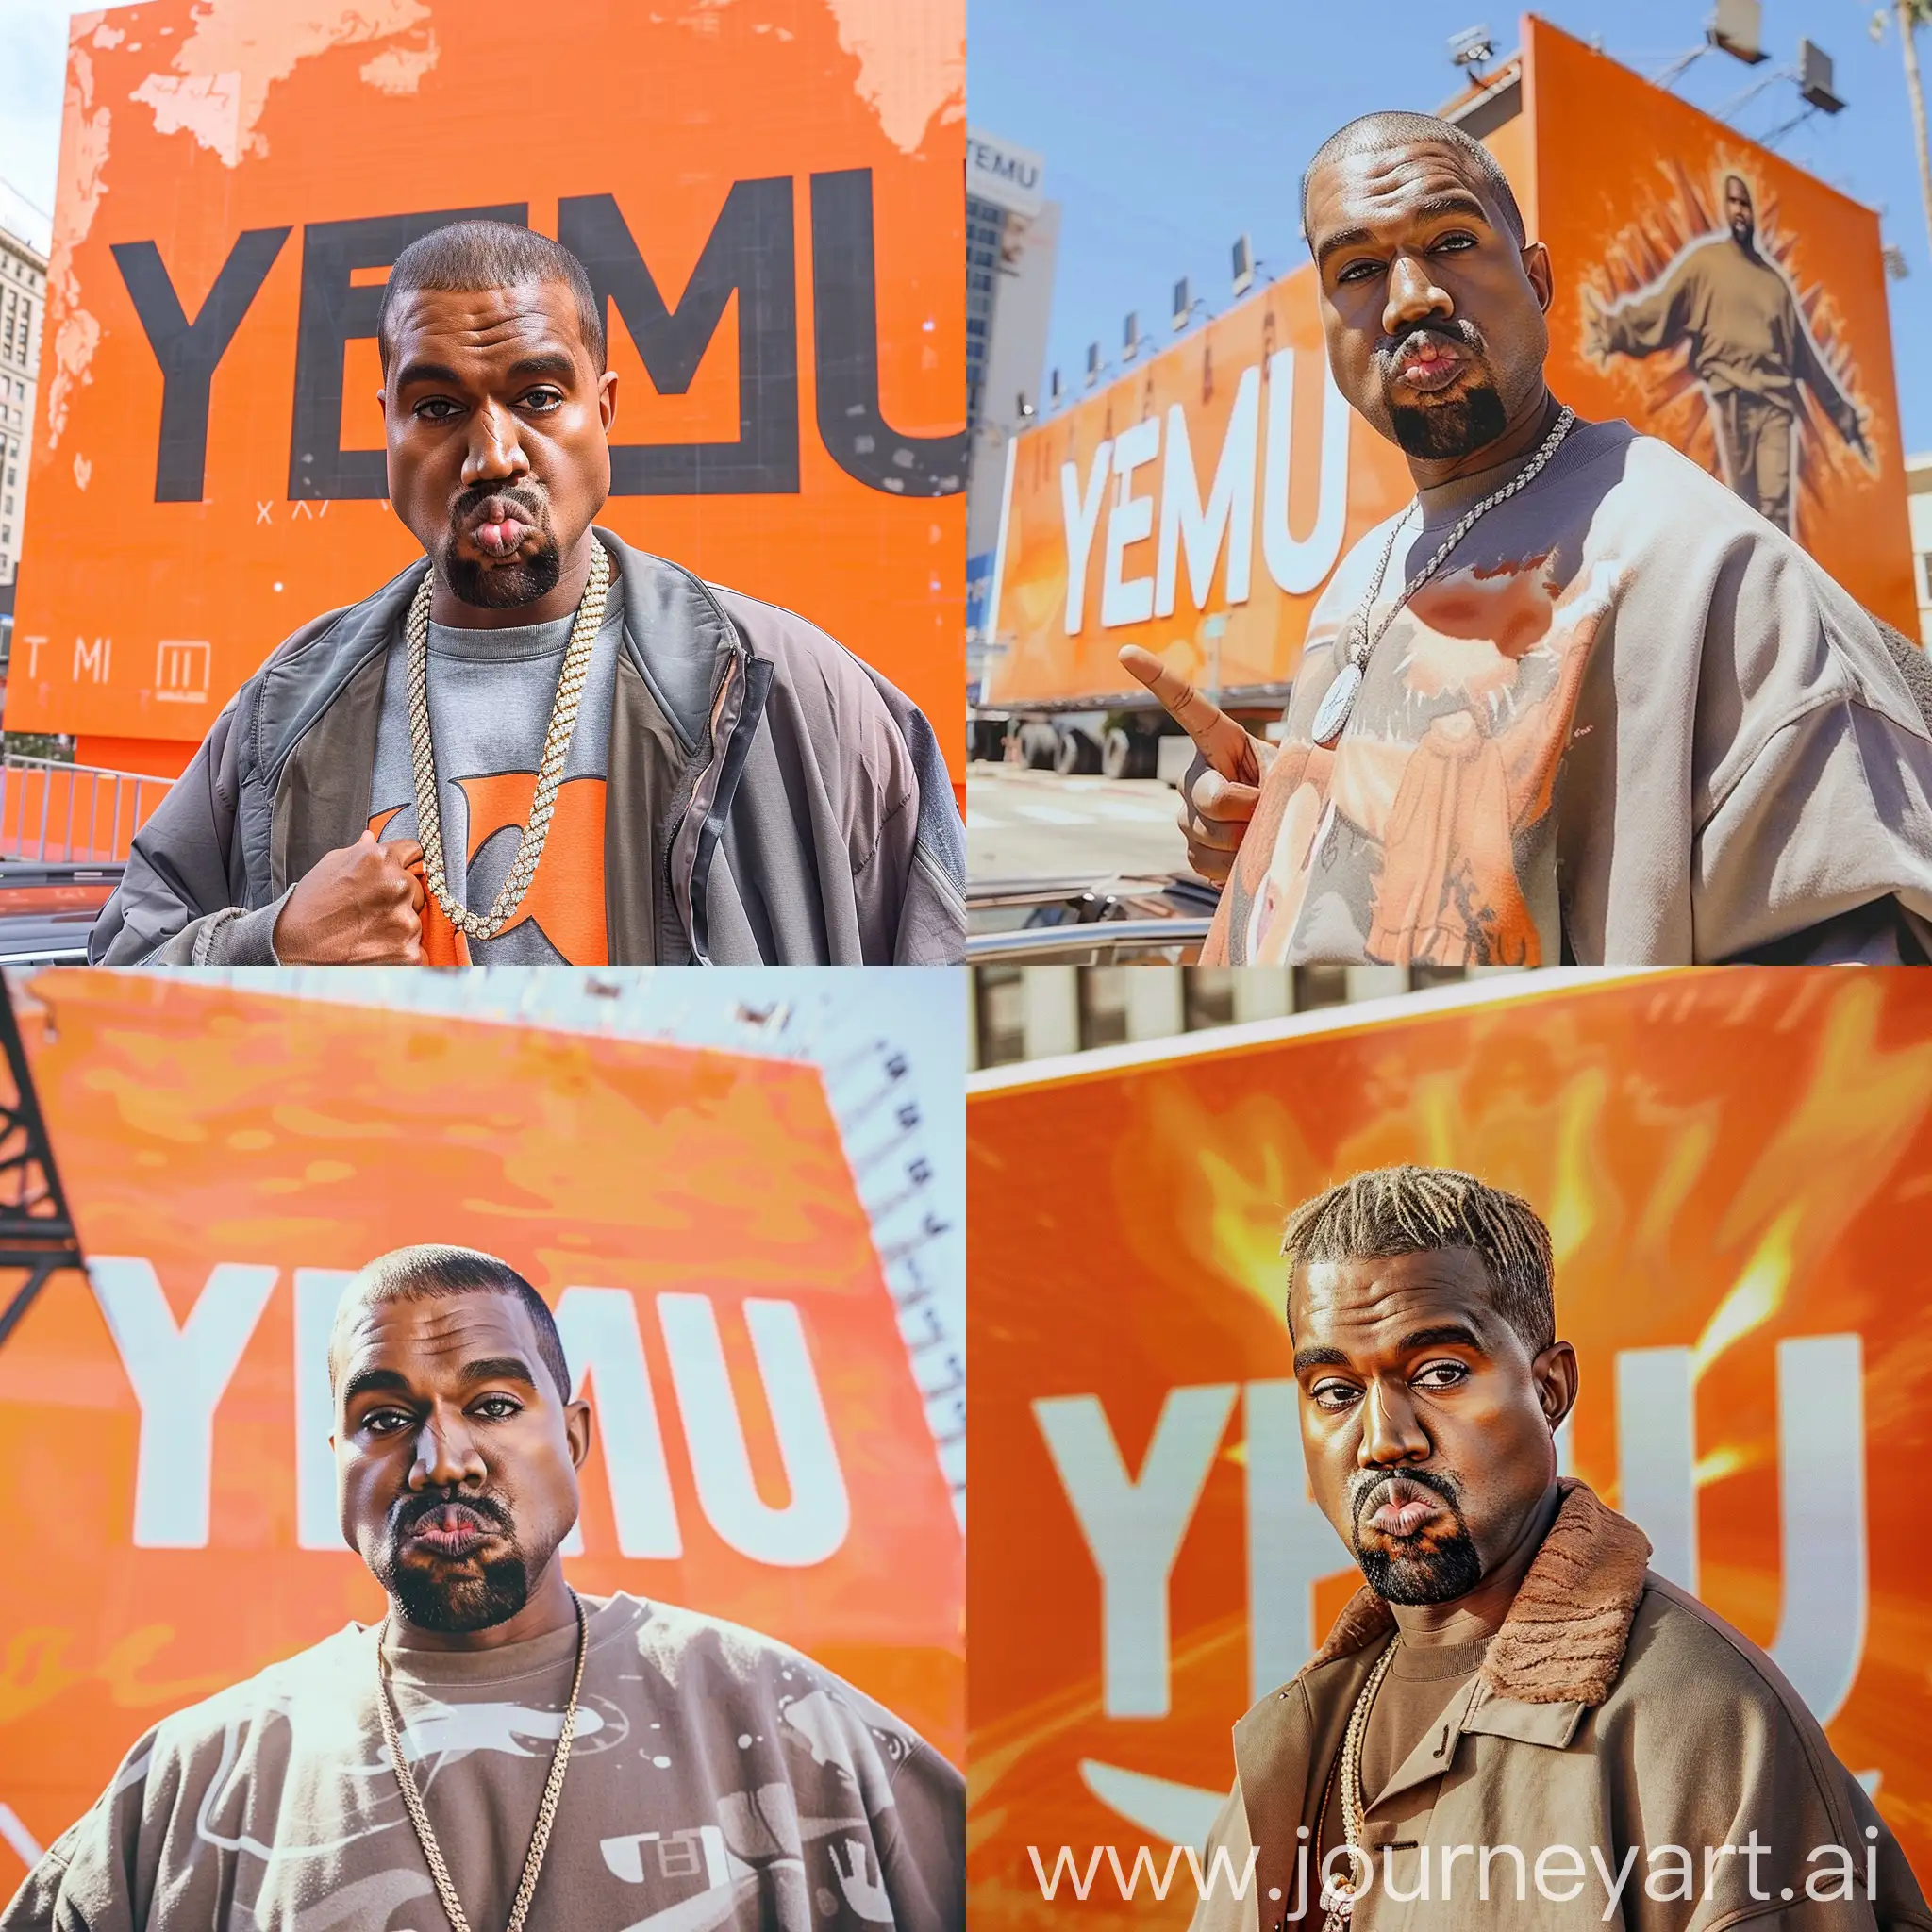 Kanye-West-Pouting-in-Front-of-TEMU-Billboard-in-Yeezy-Apparel